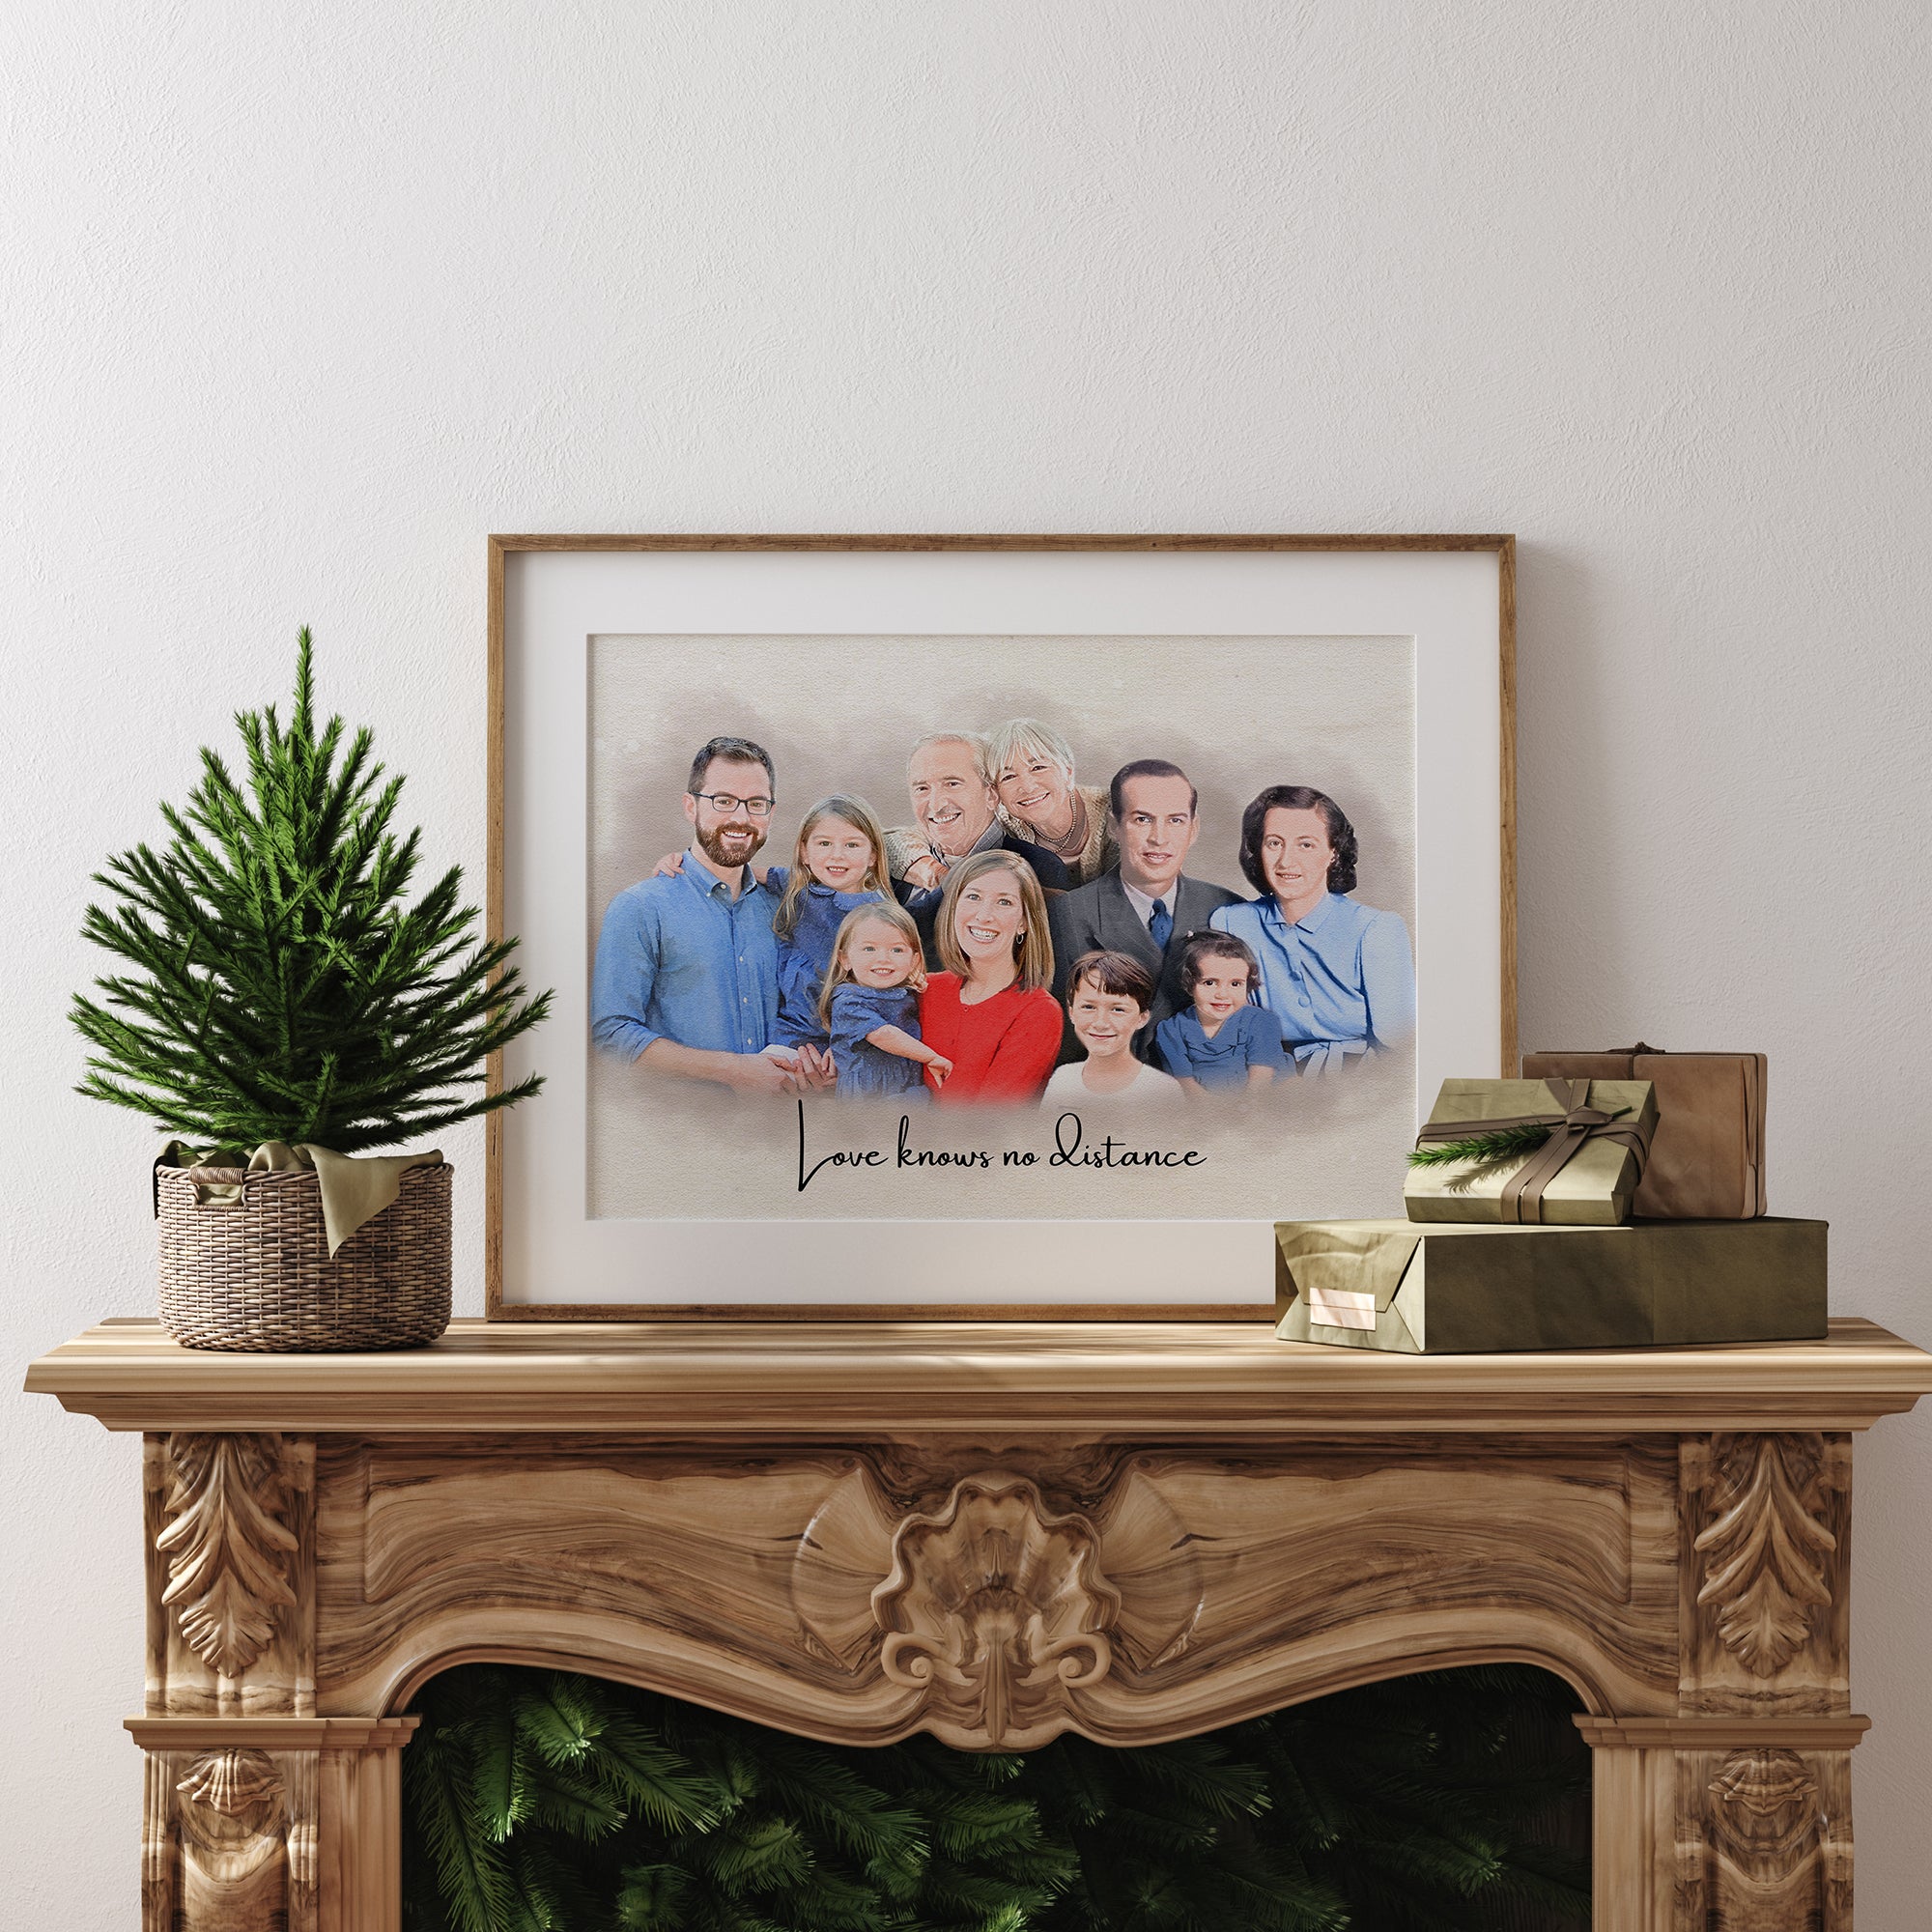 Family Portrait With Deceased Loved One, Add Deceased Loved One To